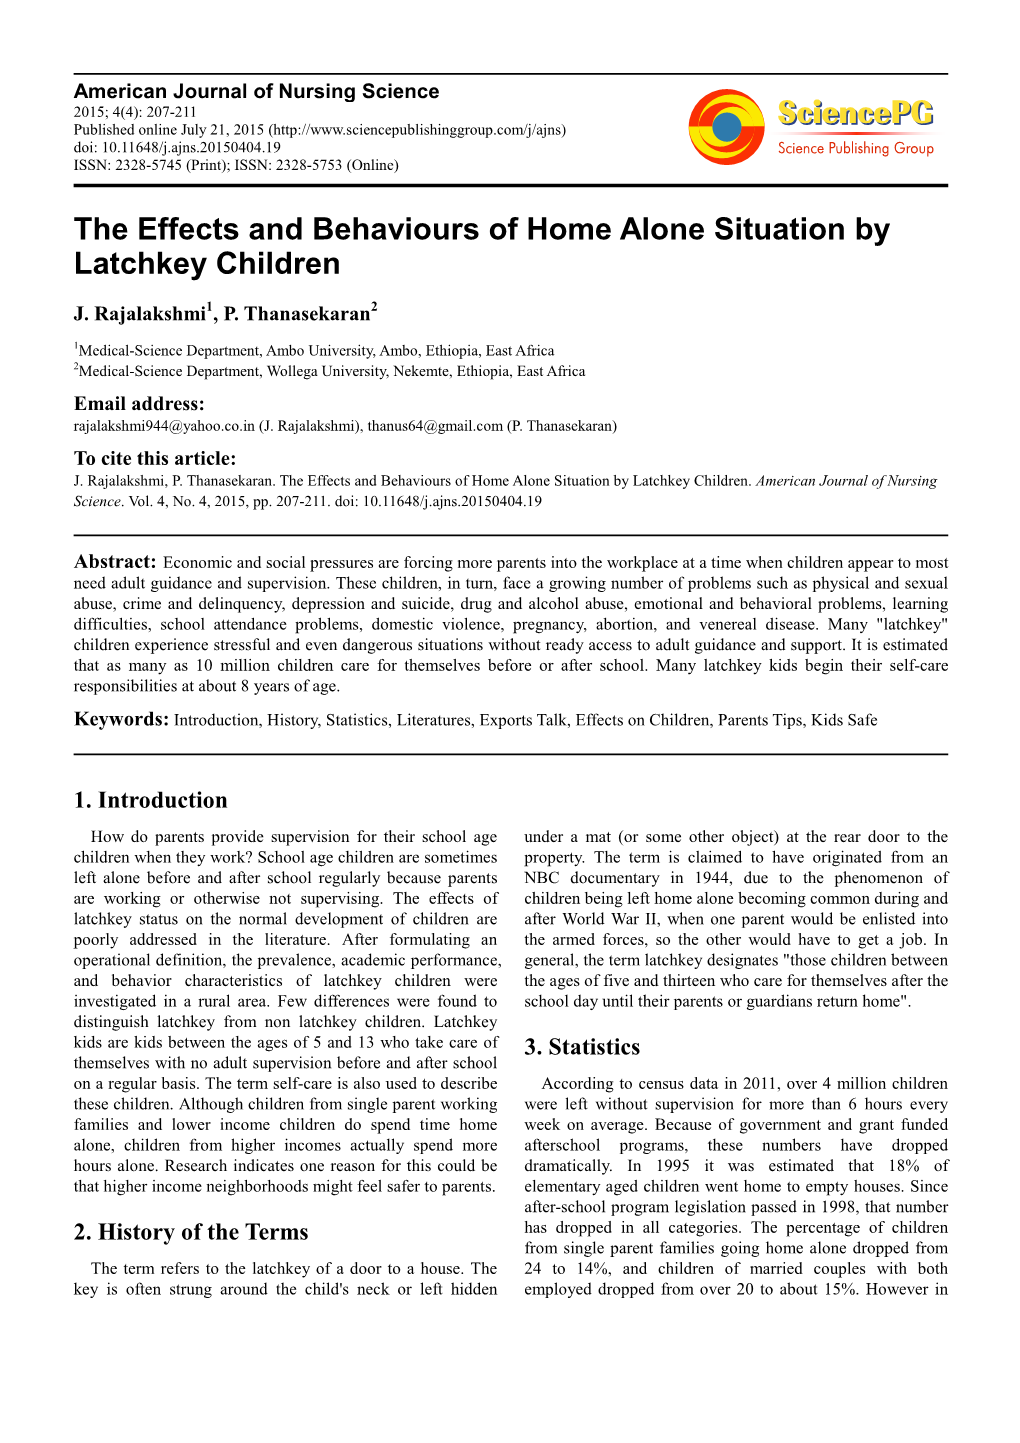 The Effects and Behaviours of Home Alone Situation by Latchkey Children